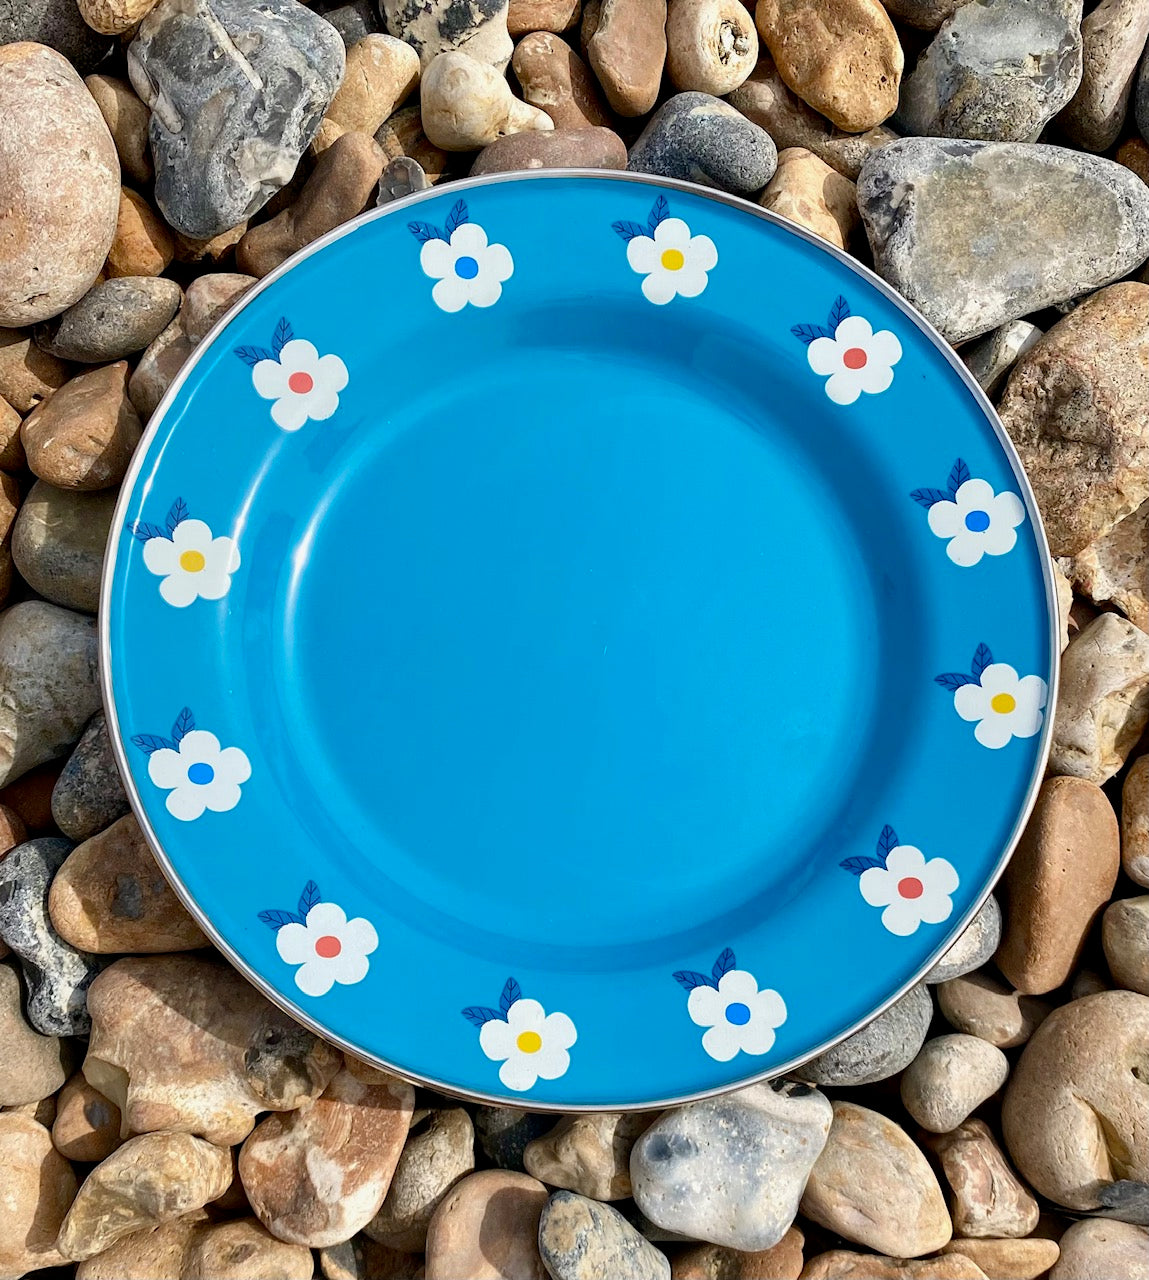 Beautiful enamel plates in teal ocean blue. Pretty, durable AND practical, they have a pretty flower design and steel rim around the edge. Camping in style!